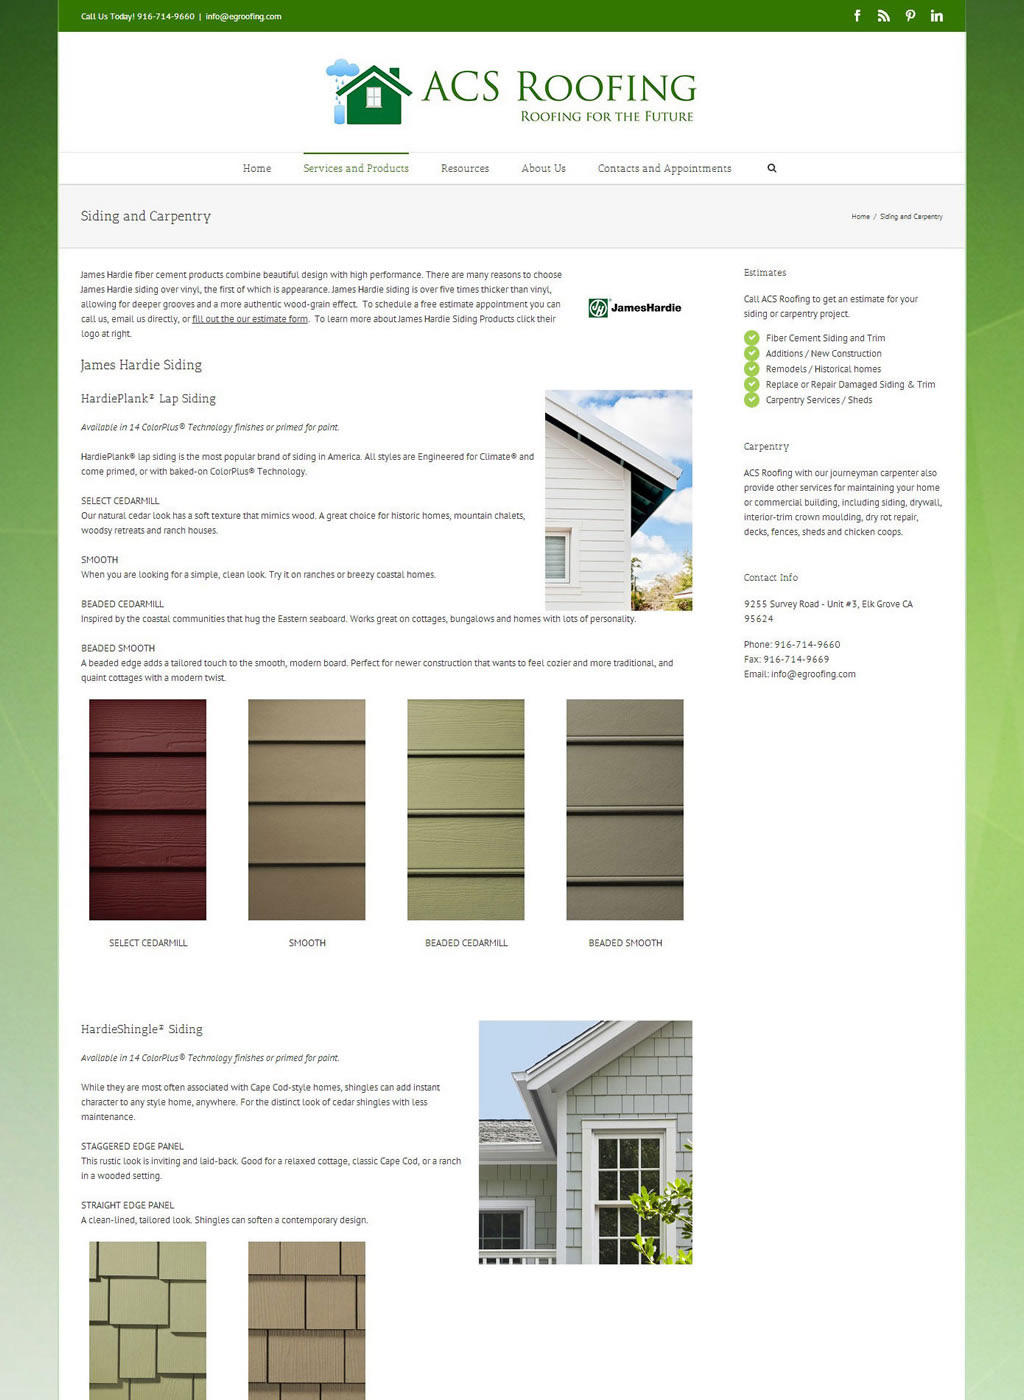 Siding and Carpentry page of ACS Roofing